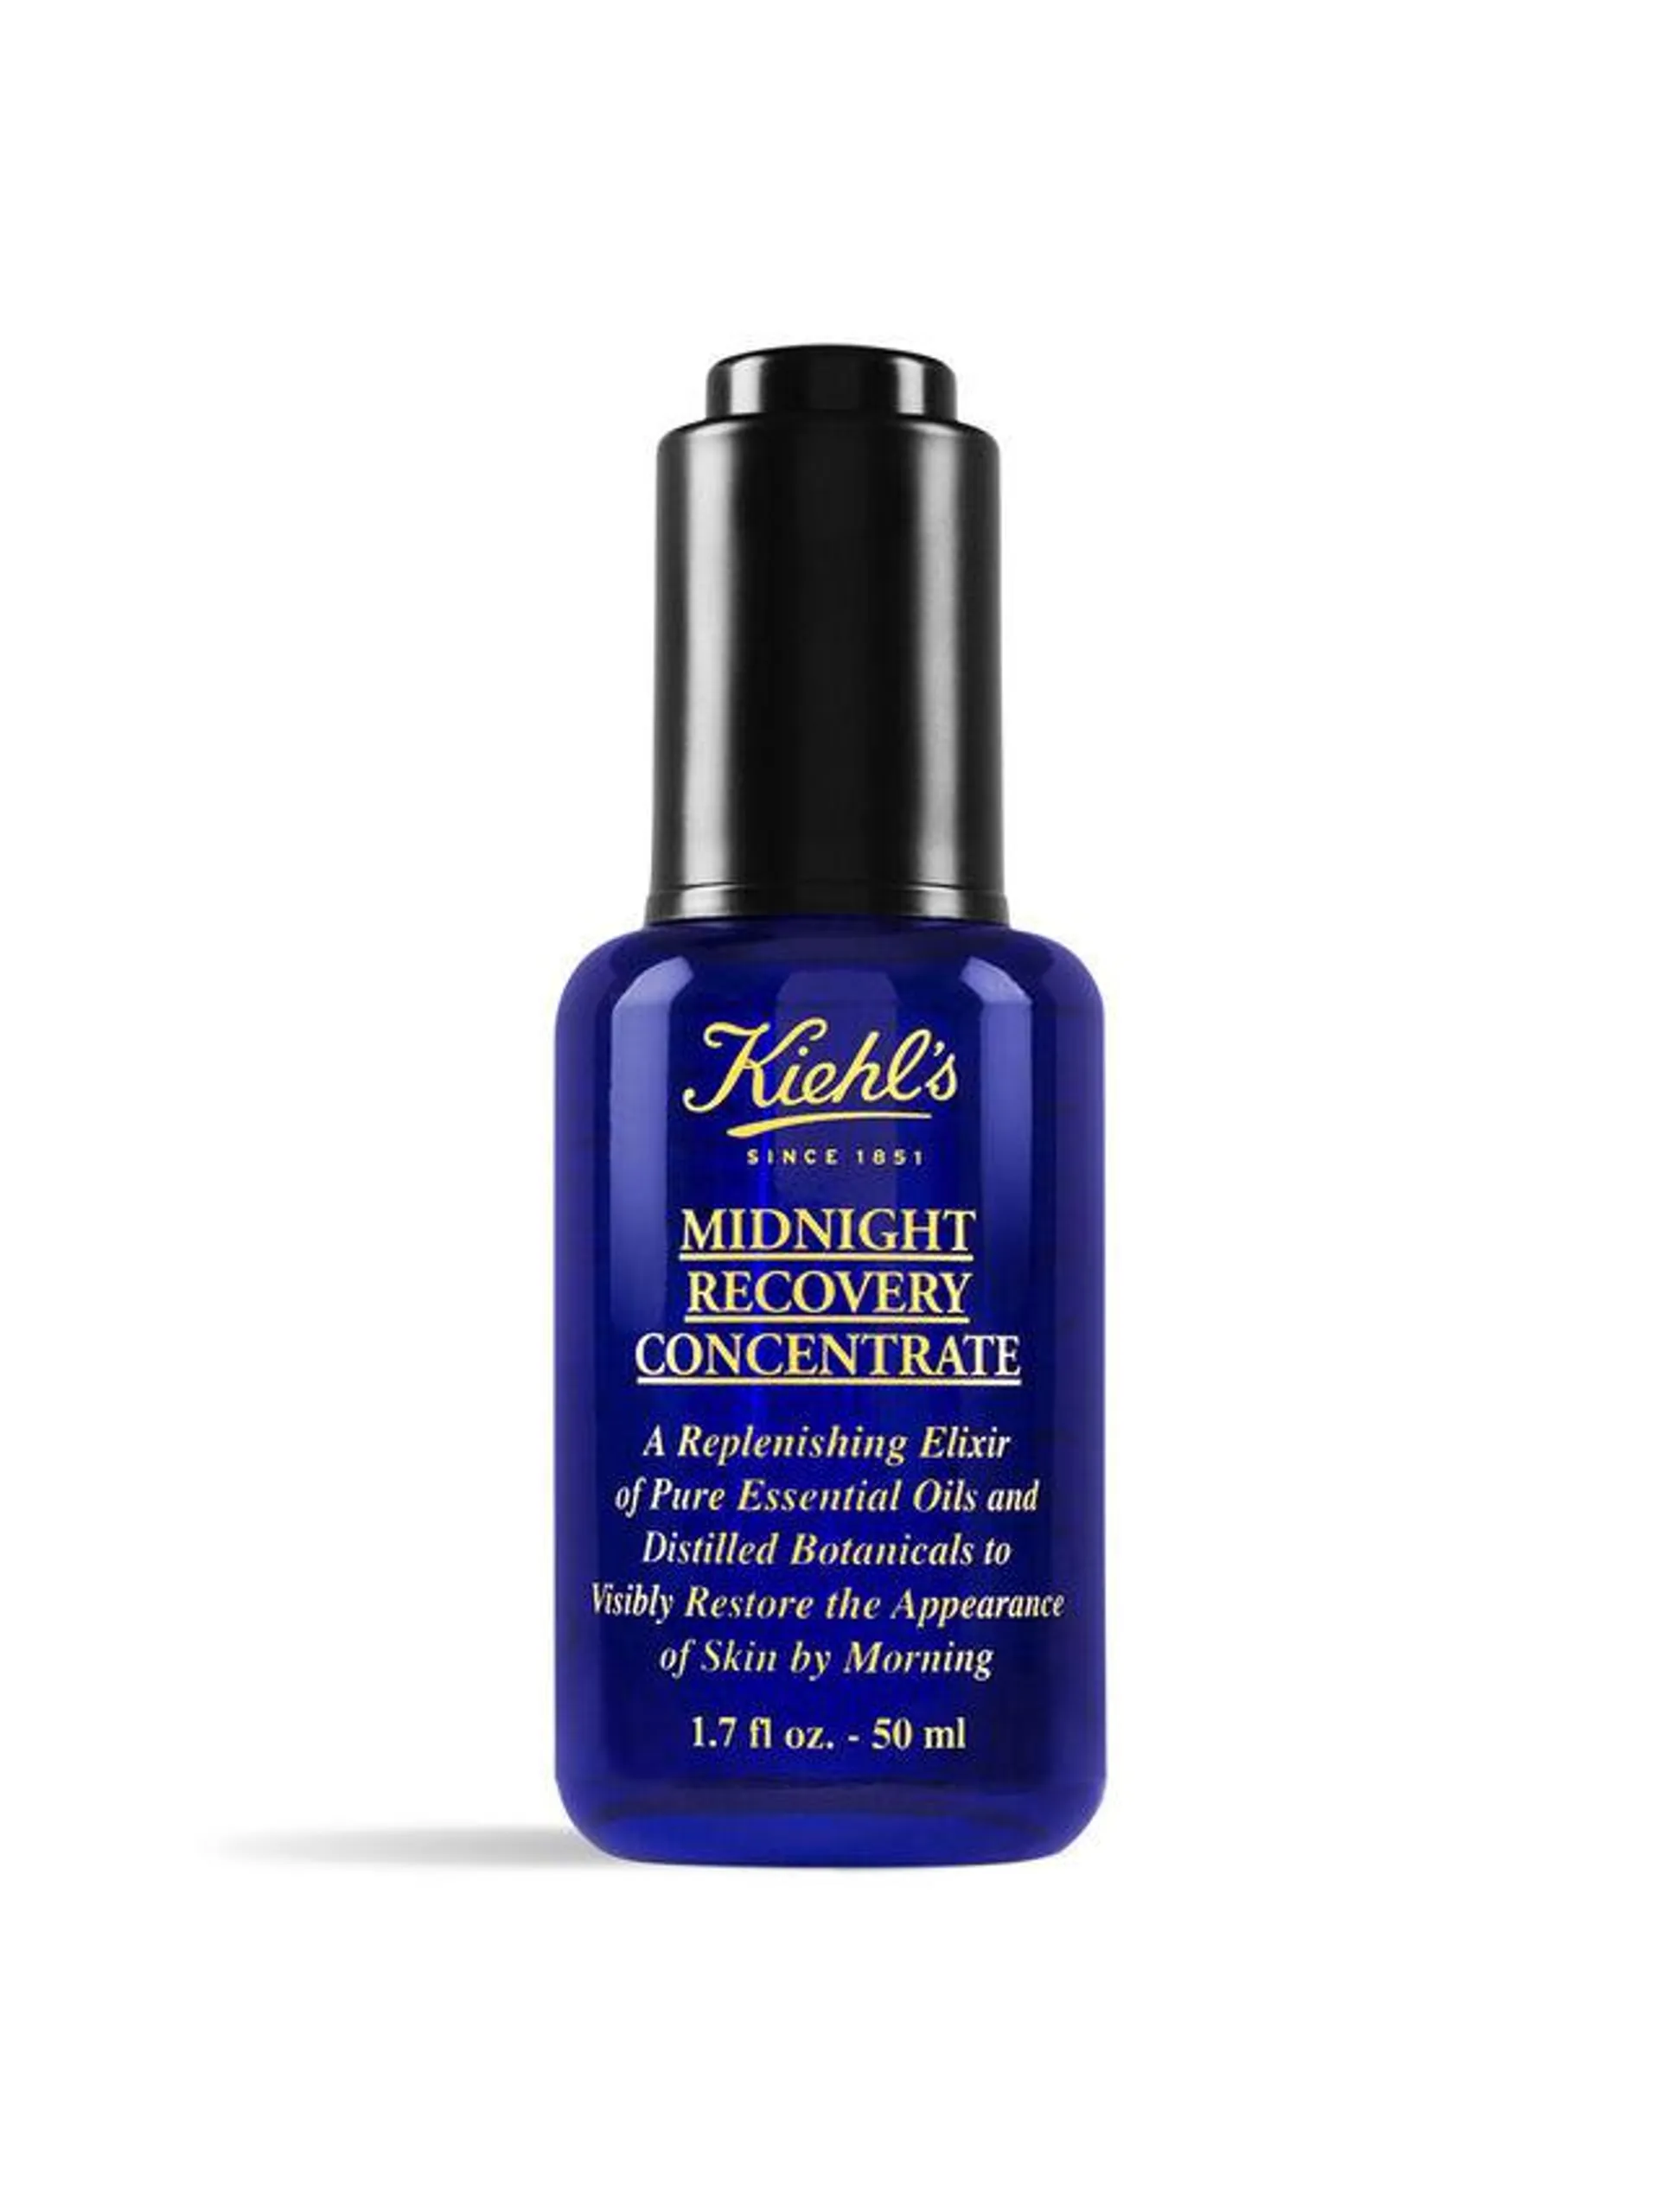 Kiehl's Midnight Recovery Concentrate 50 ml